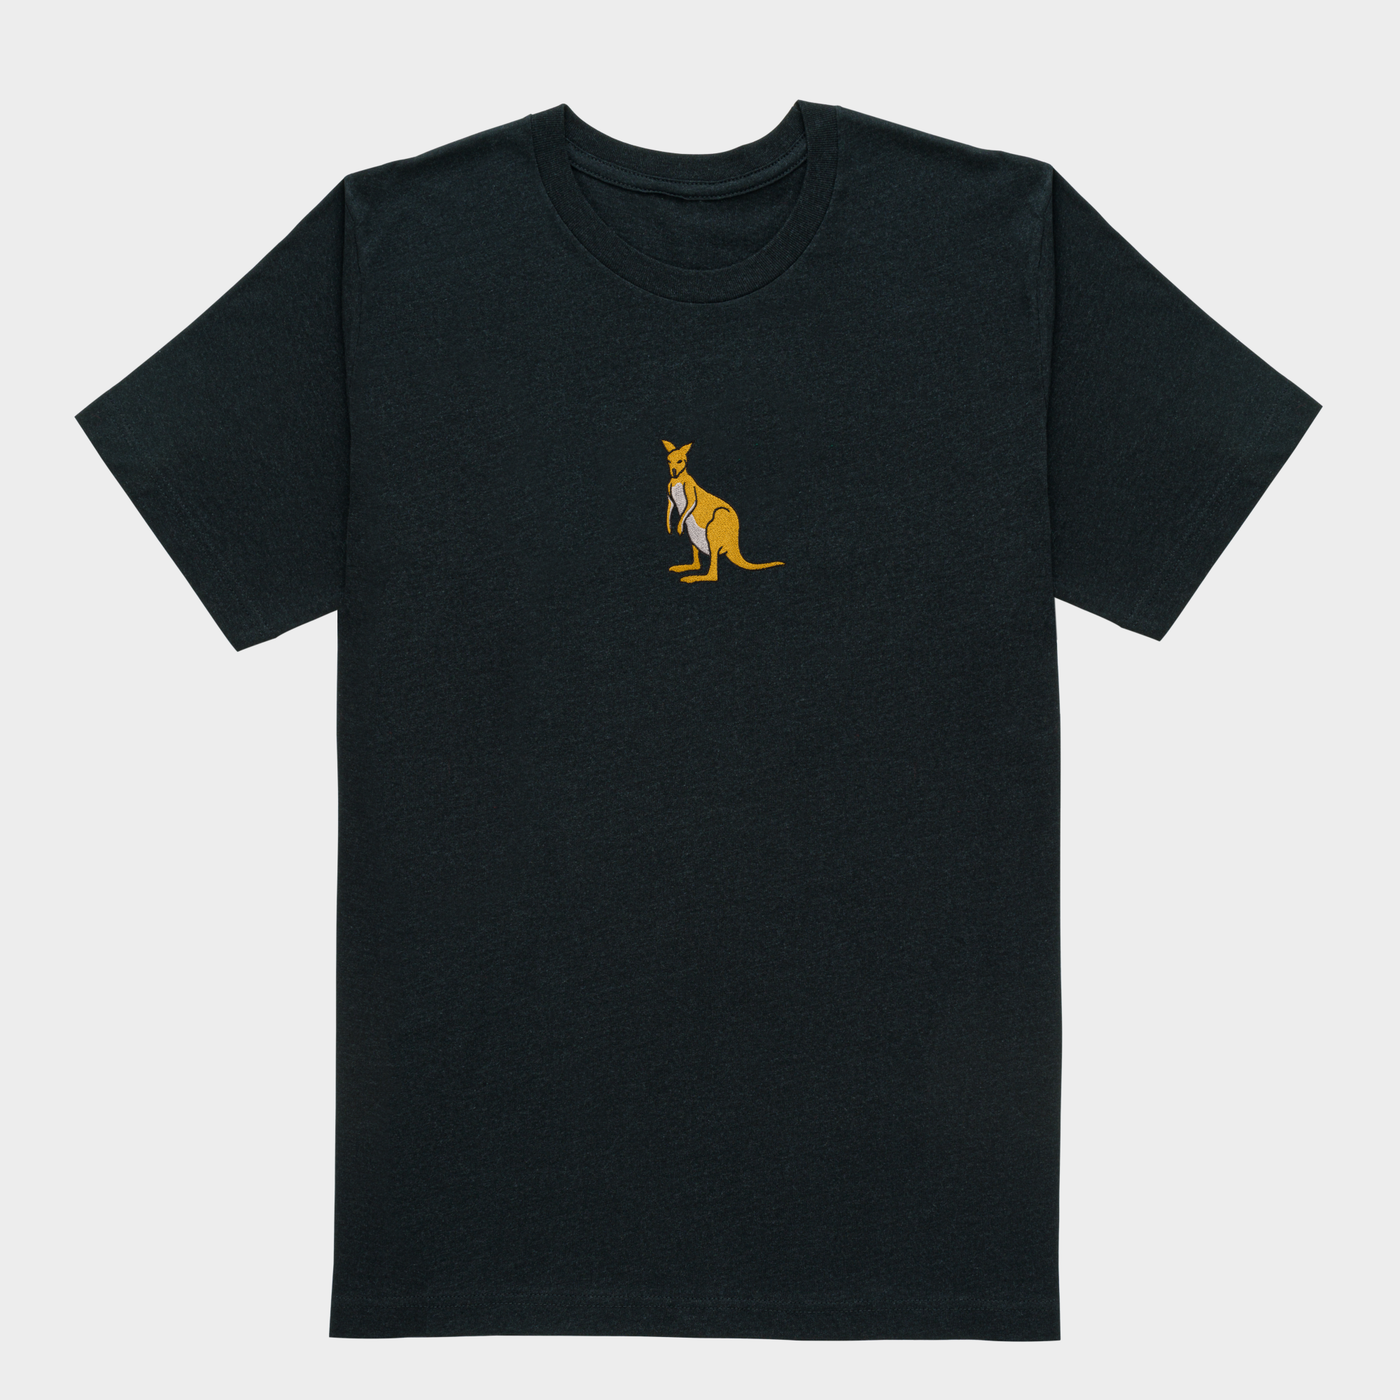 Bobby's Planet Men's Embroidered Kangaroo T-Shirt from Australia Down Under Animals Collection in Black Heather Color#color_black-heather